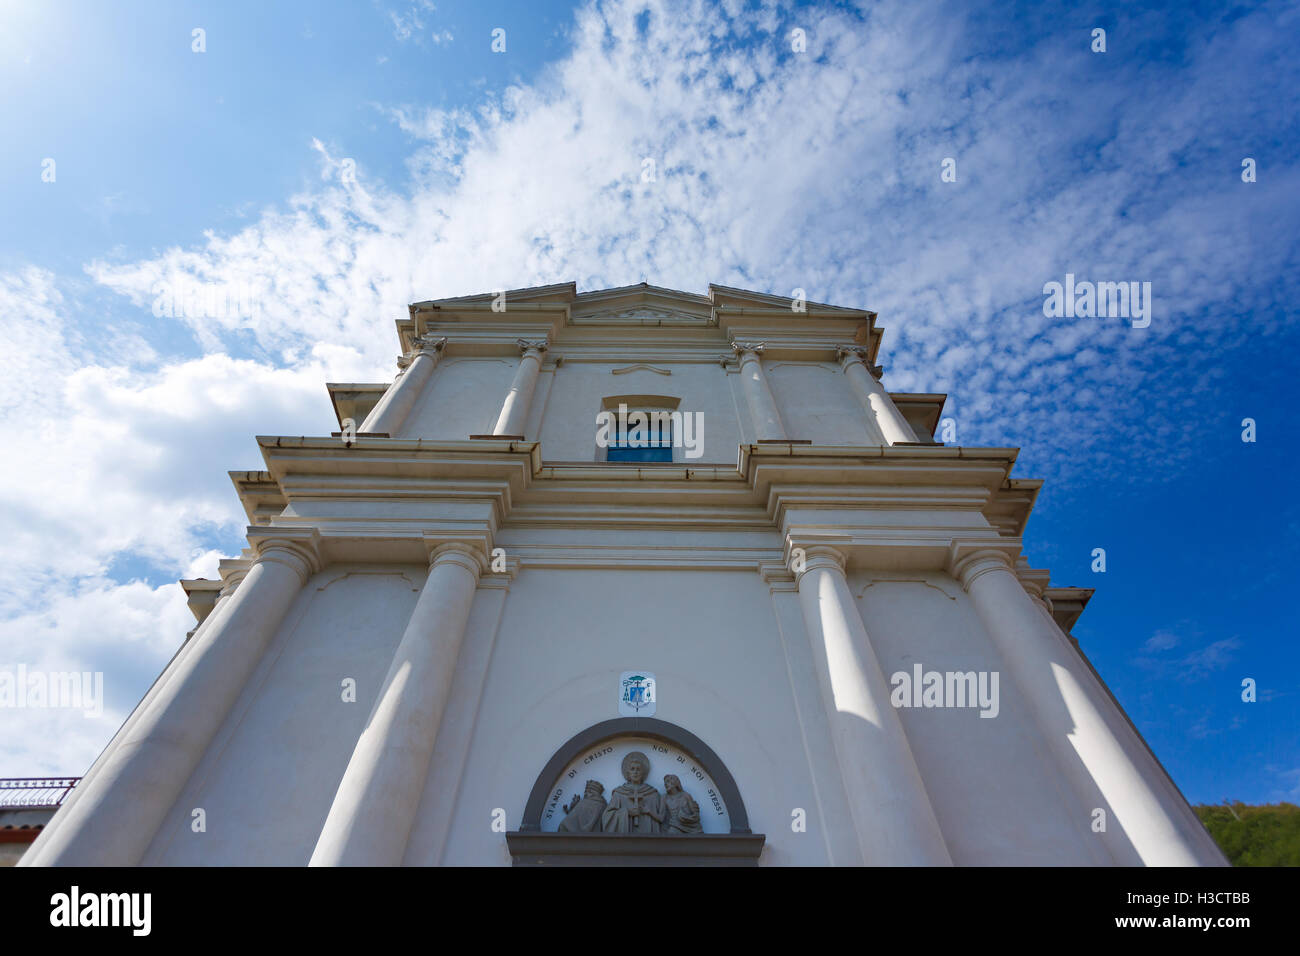 The church of San Colombano in little village Parzanica, Italy Stock Photo